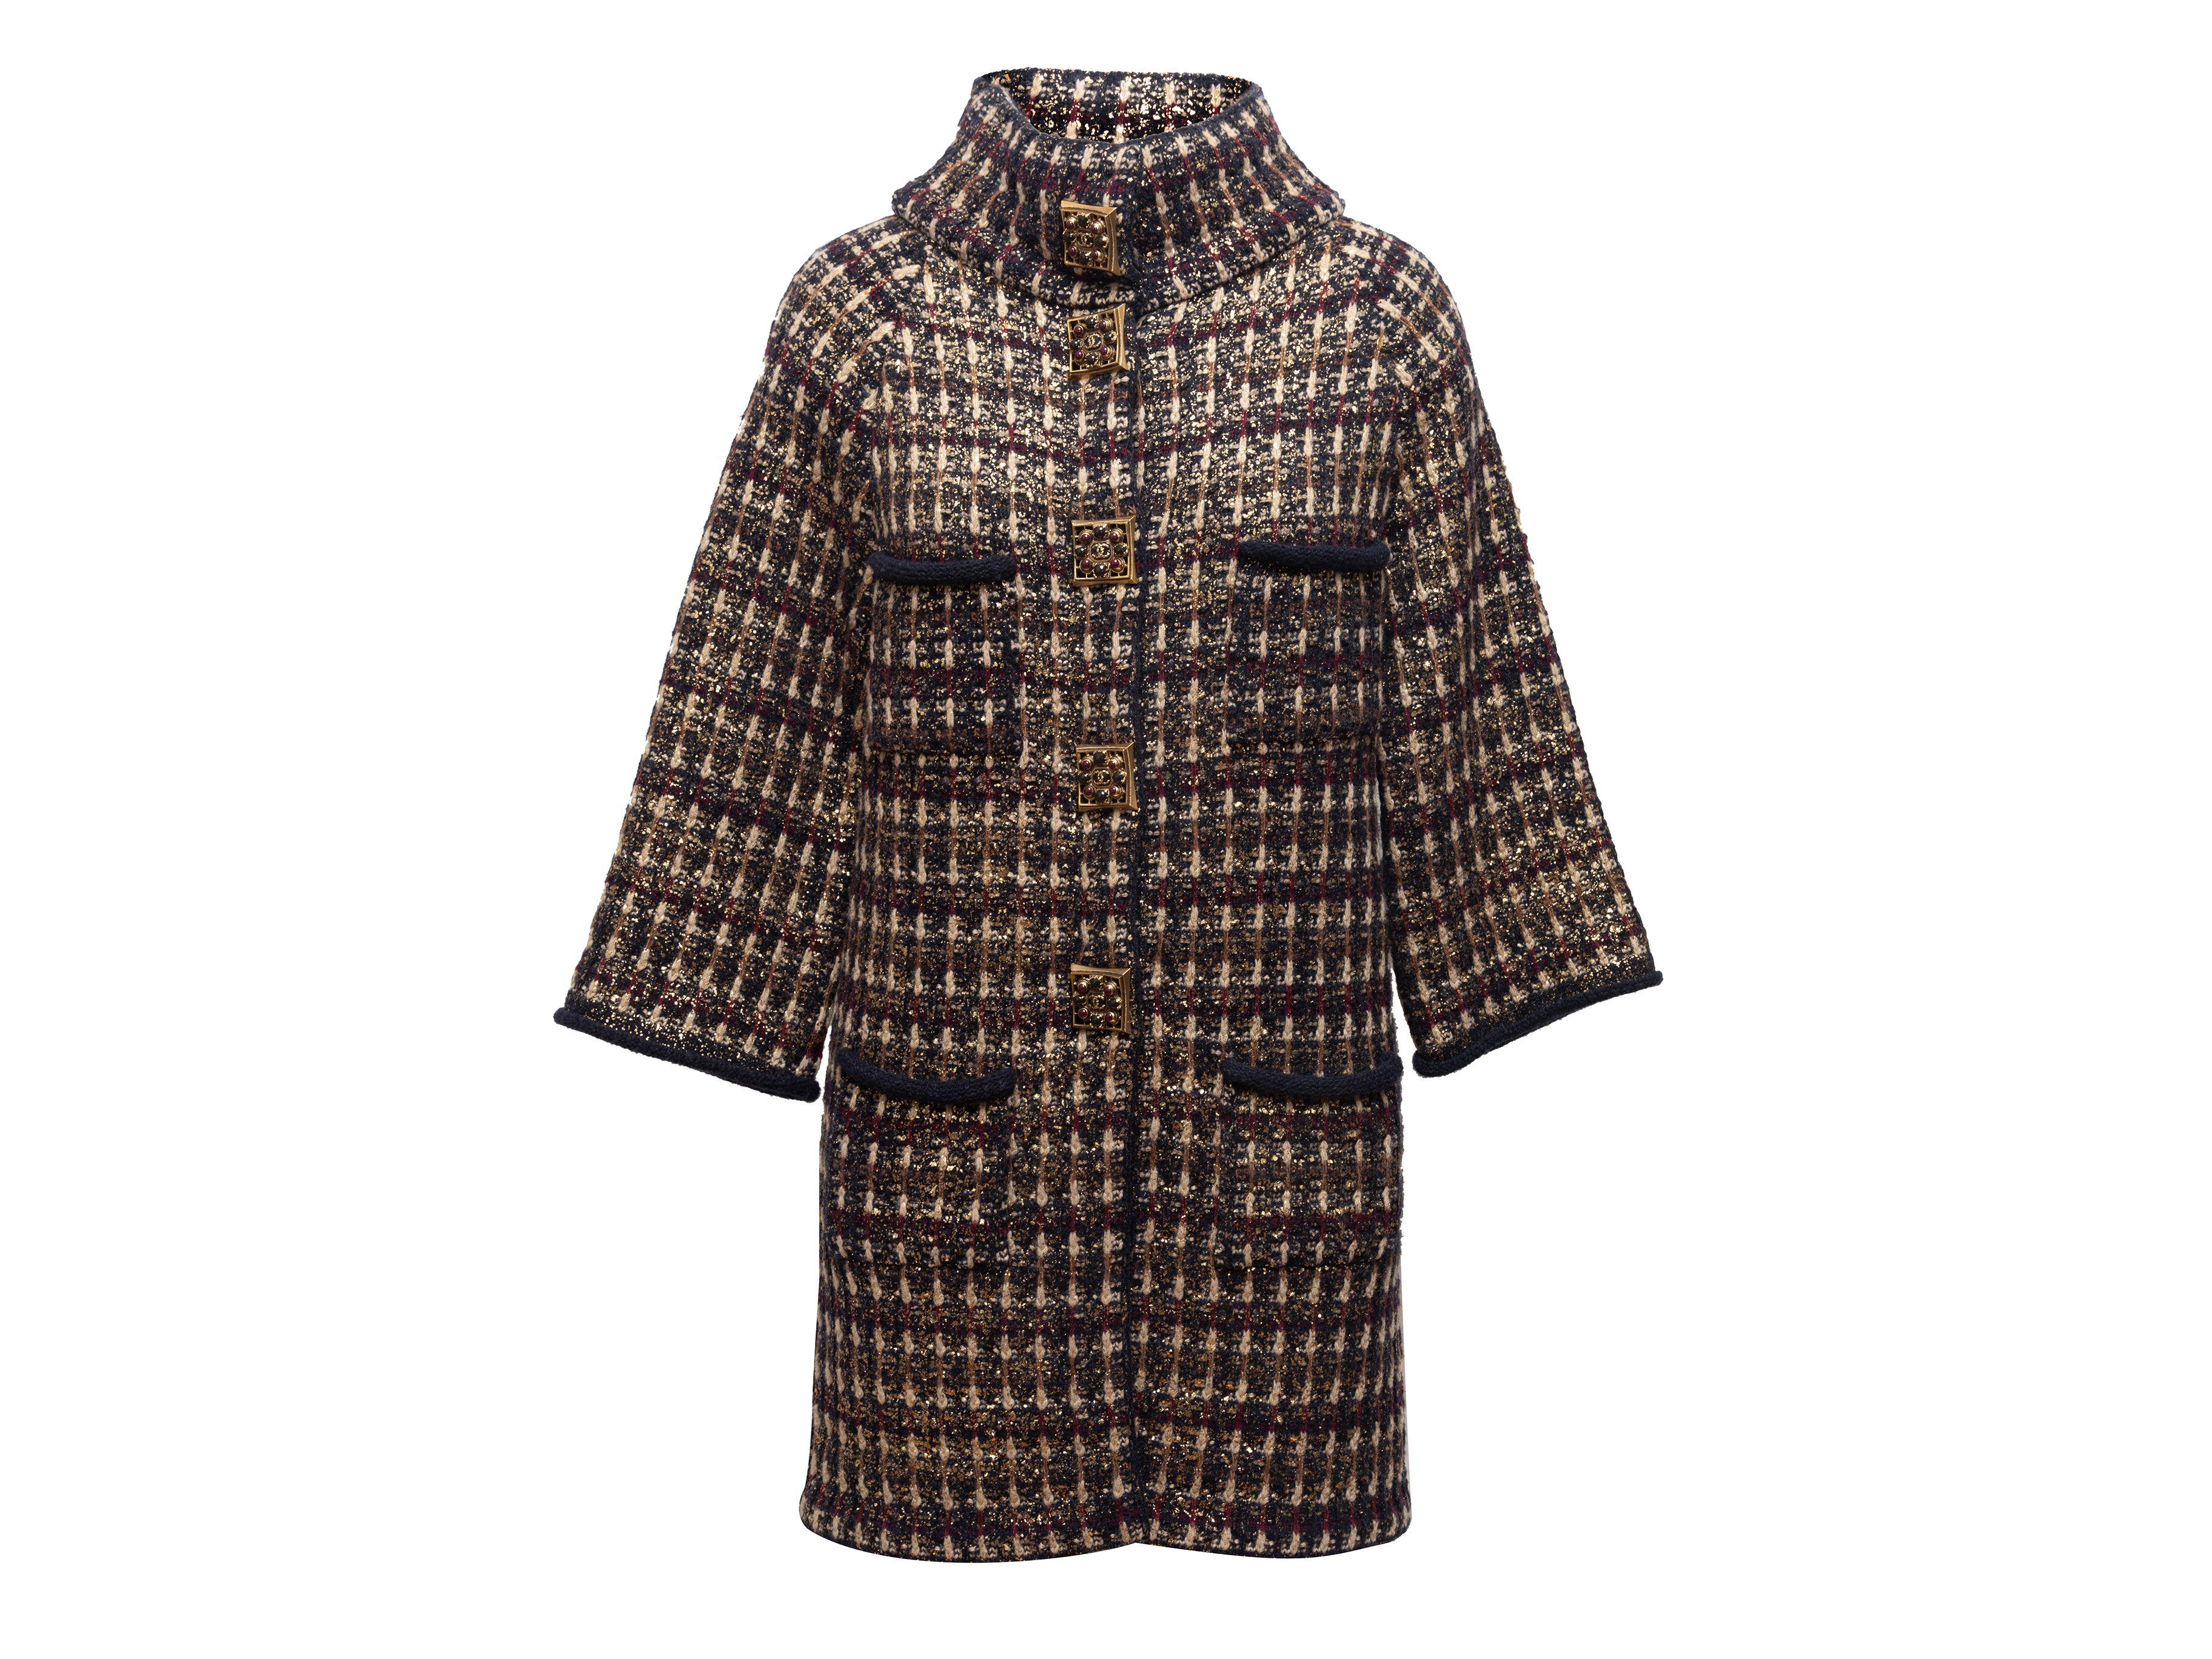 Product Details: Navy, maroon, and multicolor wool and cashmere-blend tweed coat by Chanel. From the Pre-Fall 2011 Paris-Byzane Collection. Stand collar. Four patch pockets at front. Gripoix button closures at center front. Designer size 38. 36